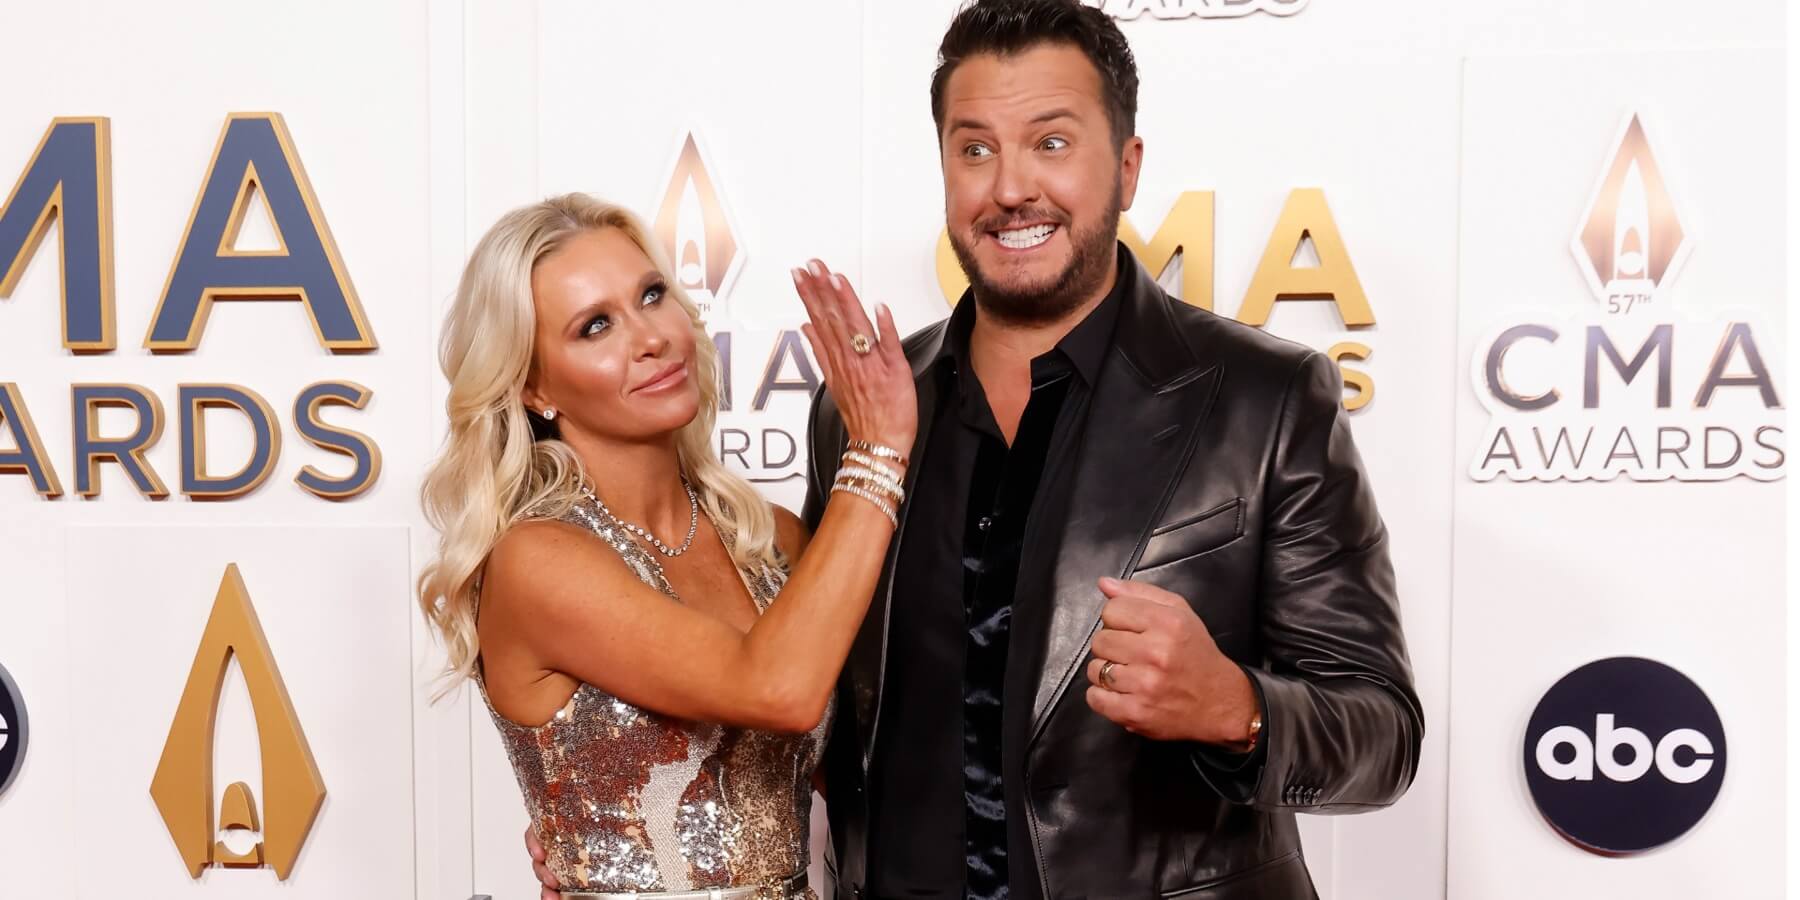 Catherine Boyer and Luke Bryan pose on the red carpet at the CMA Awards.